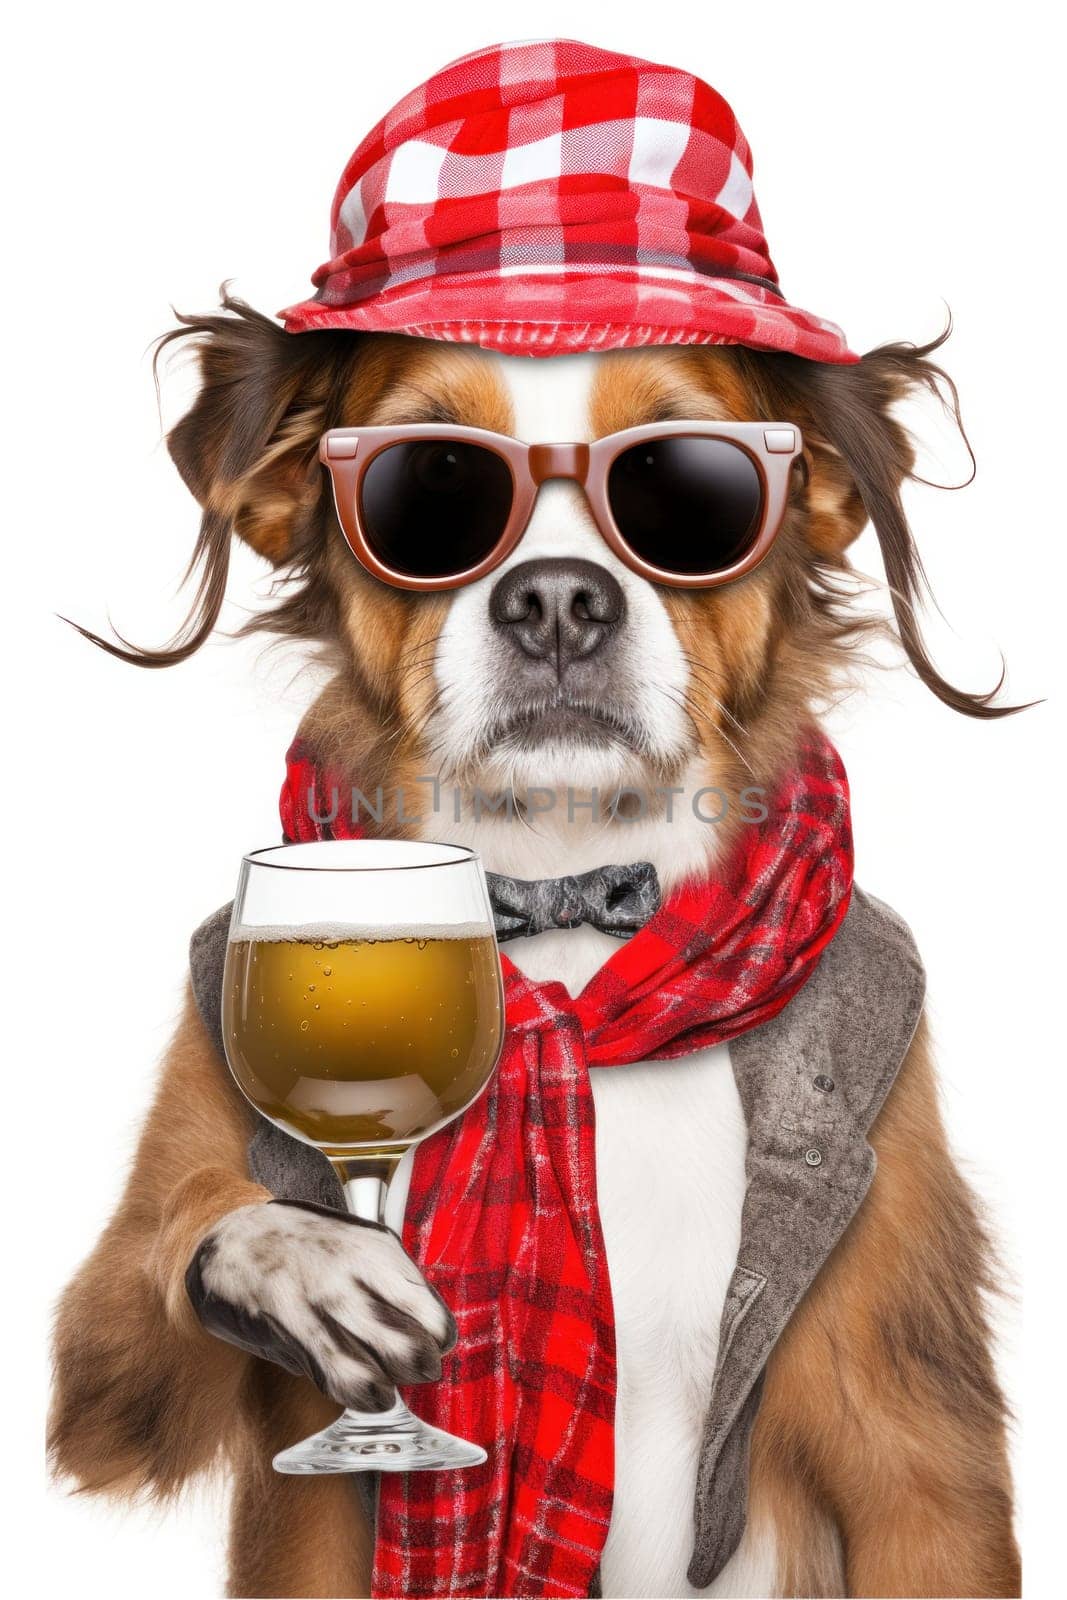 A dog wearing a red hat and scarf holding a glass of beer, AI by starush